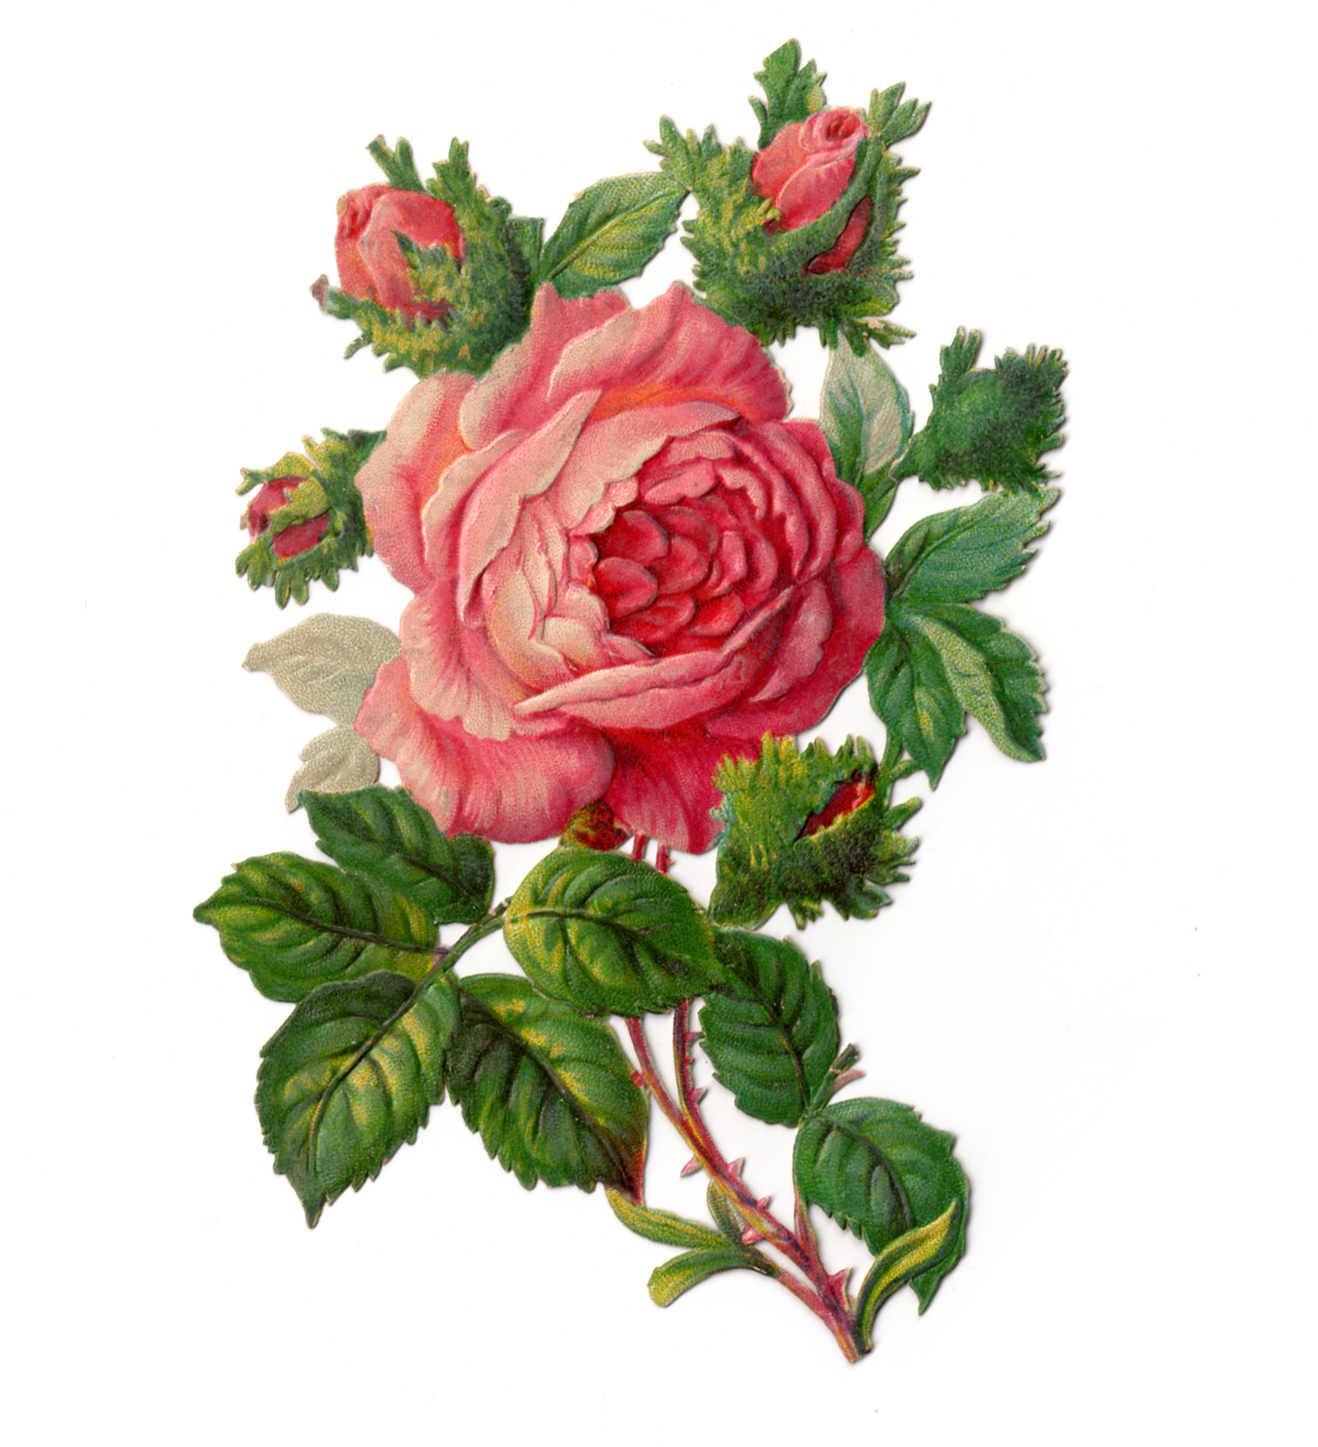 free clipart images of roses - photo #37